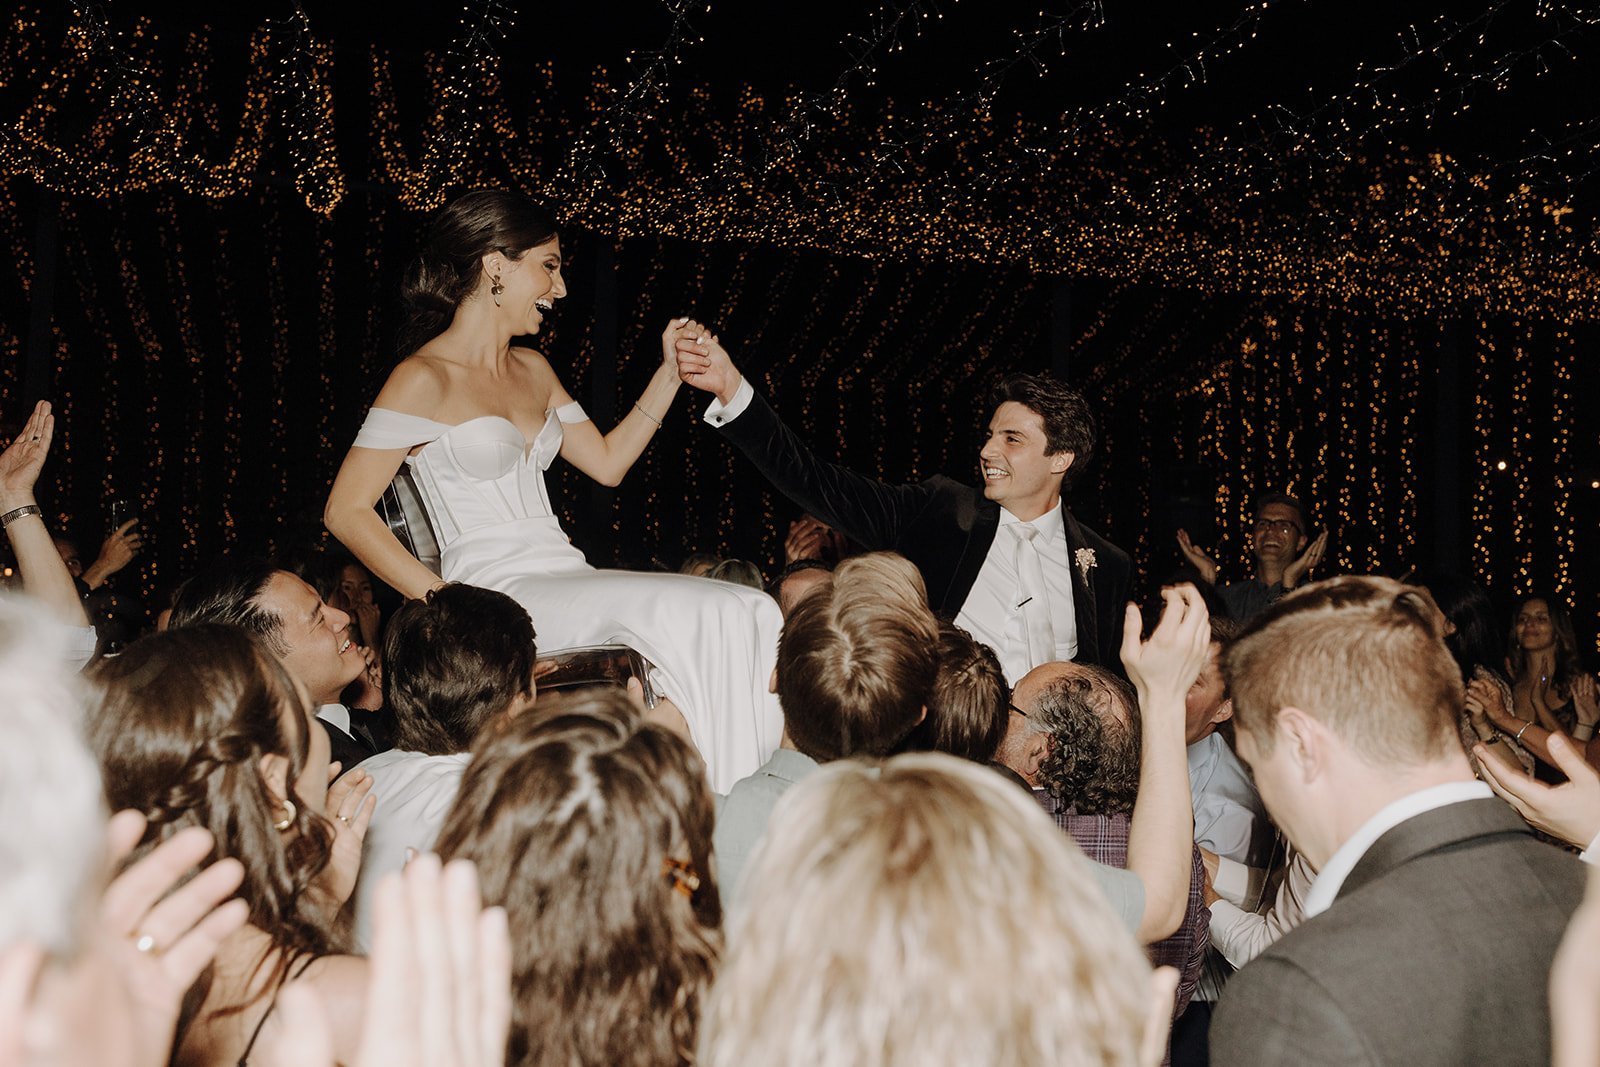 Bride and groom being lifted in the air during wedding reception dancing